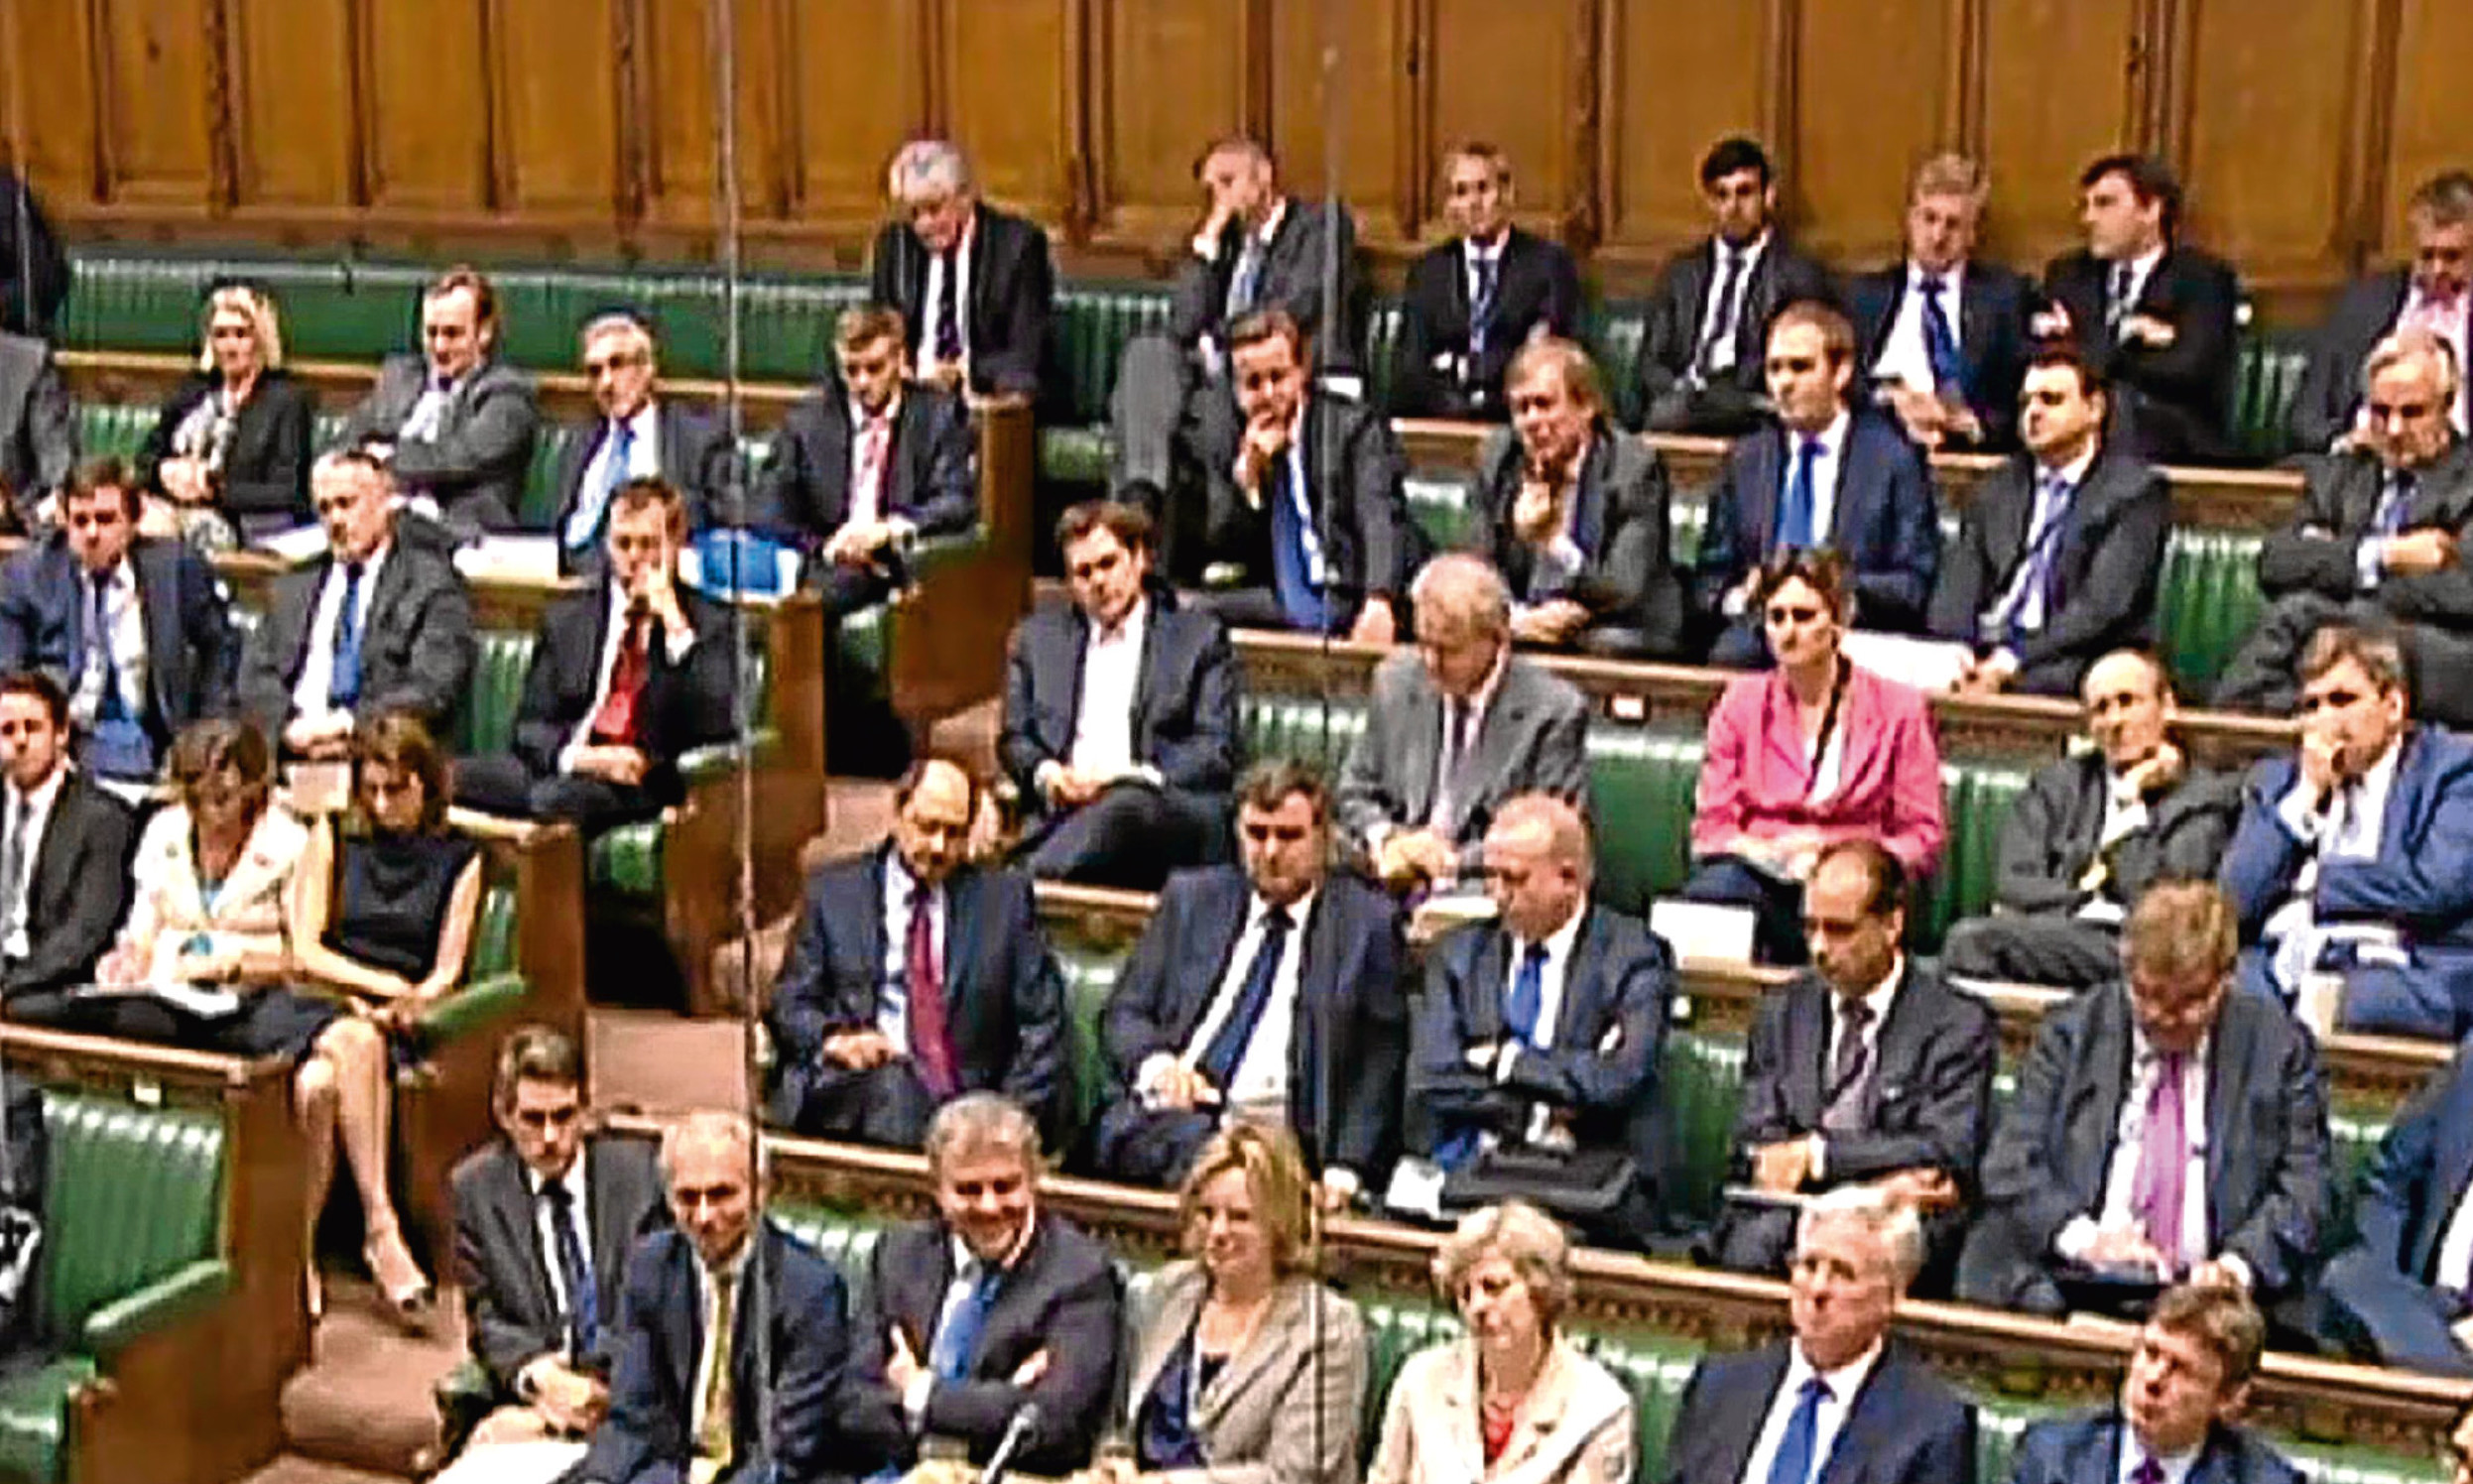 Just another backbencher. David Cameron, centre with his head resting on his hand, watches the Trident debate in the Commons from afar.